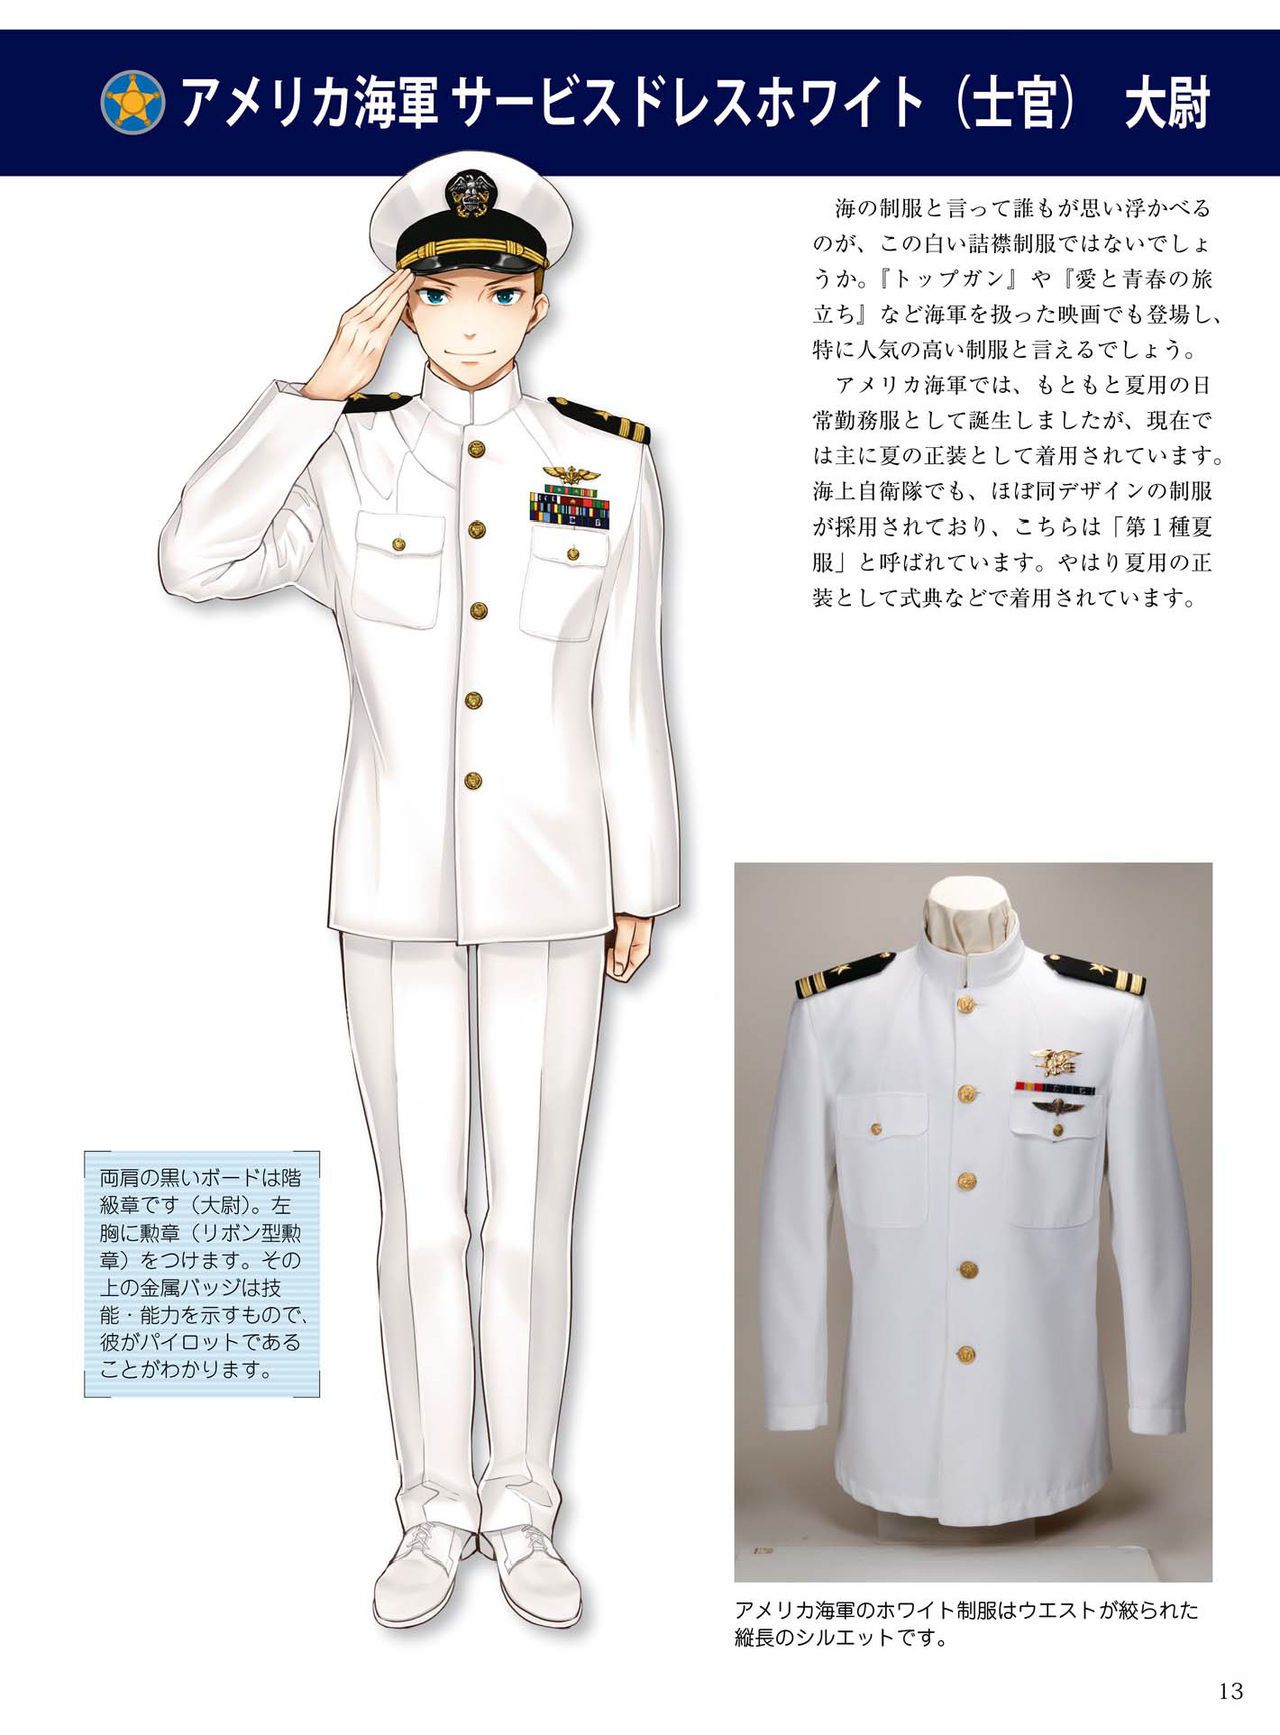 How to draw military uniforms and uniforms From Self-Defense Forces 軍服・制服の描き方 アメリカ軍・自衛隊の制服から戦闘服まで 16